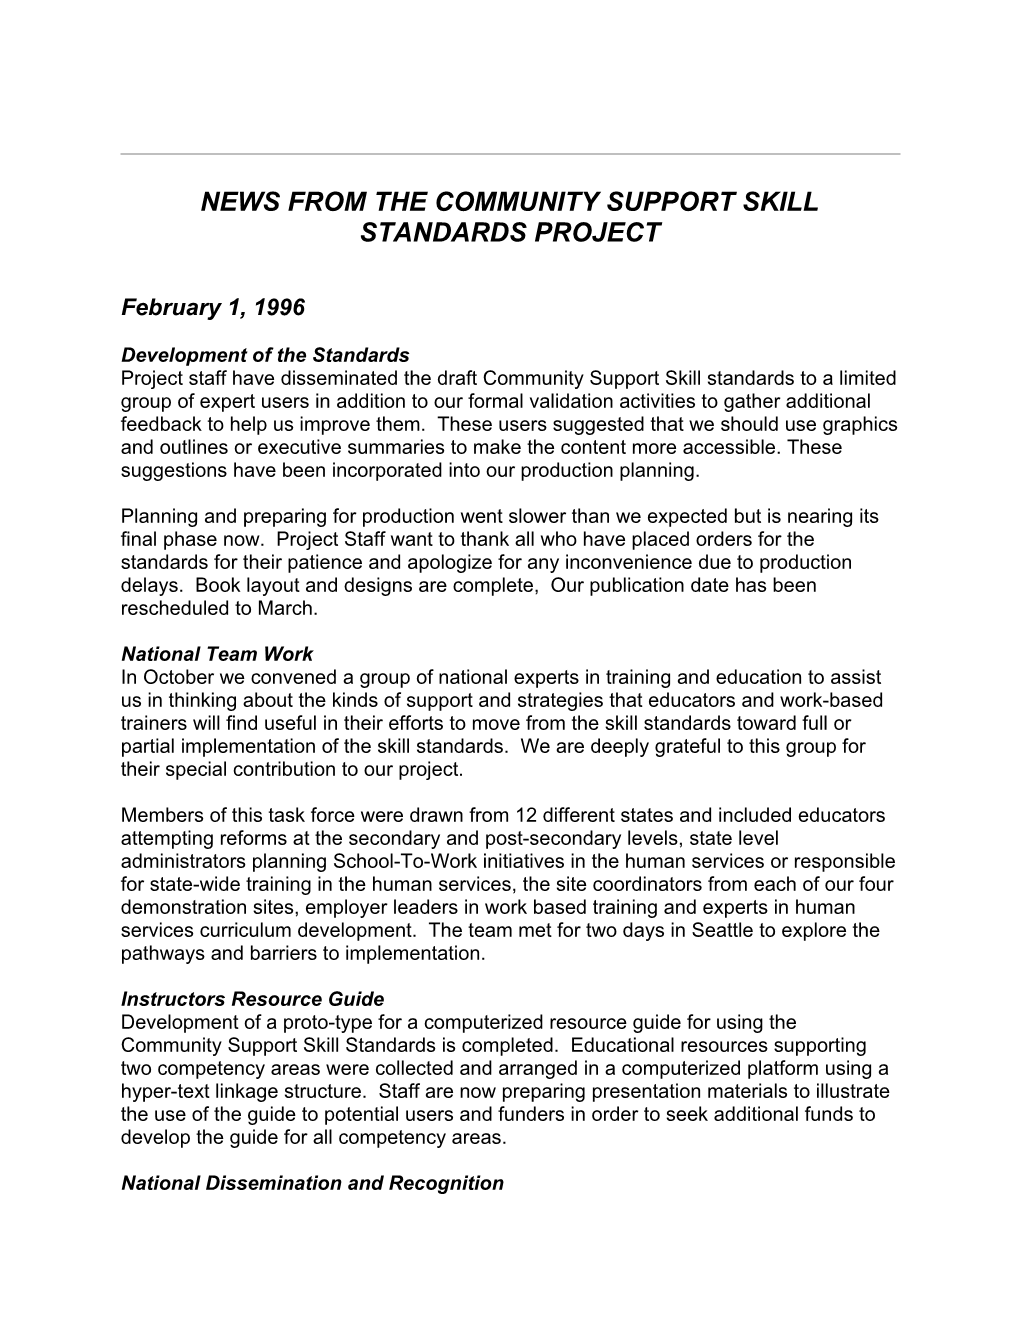 Community Support Skill Standards Project Update